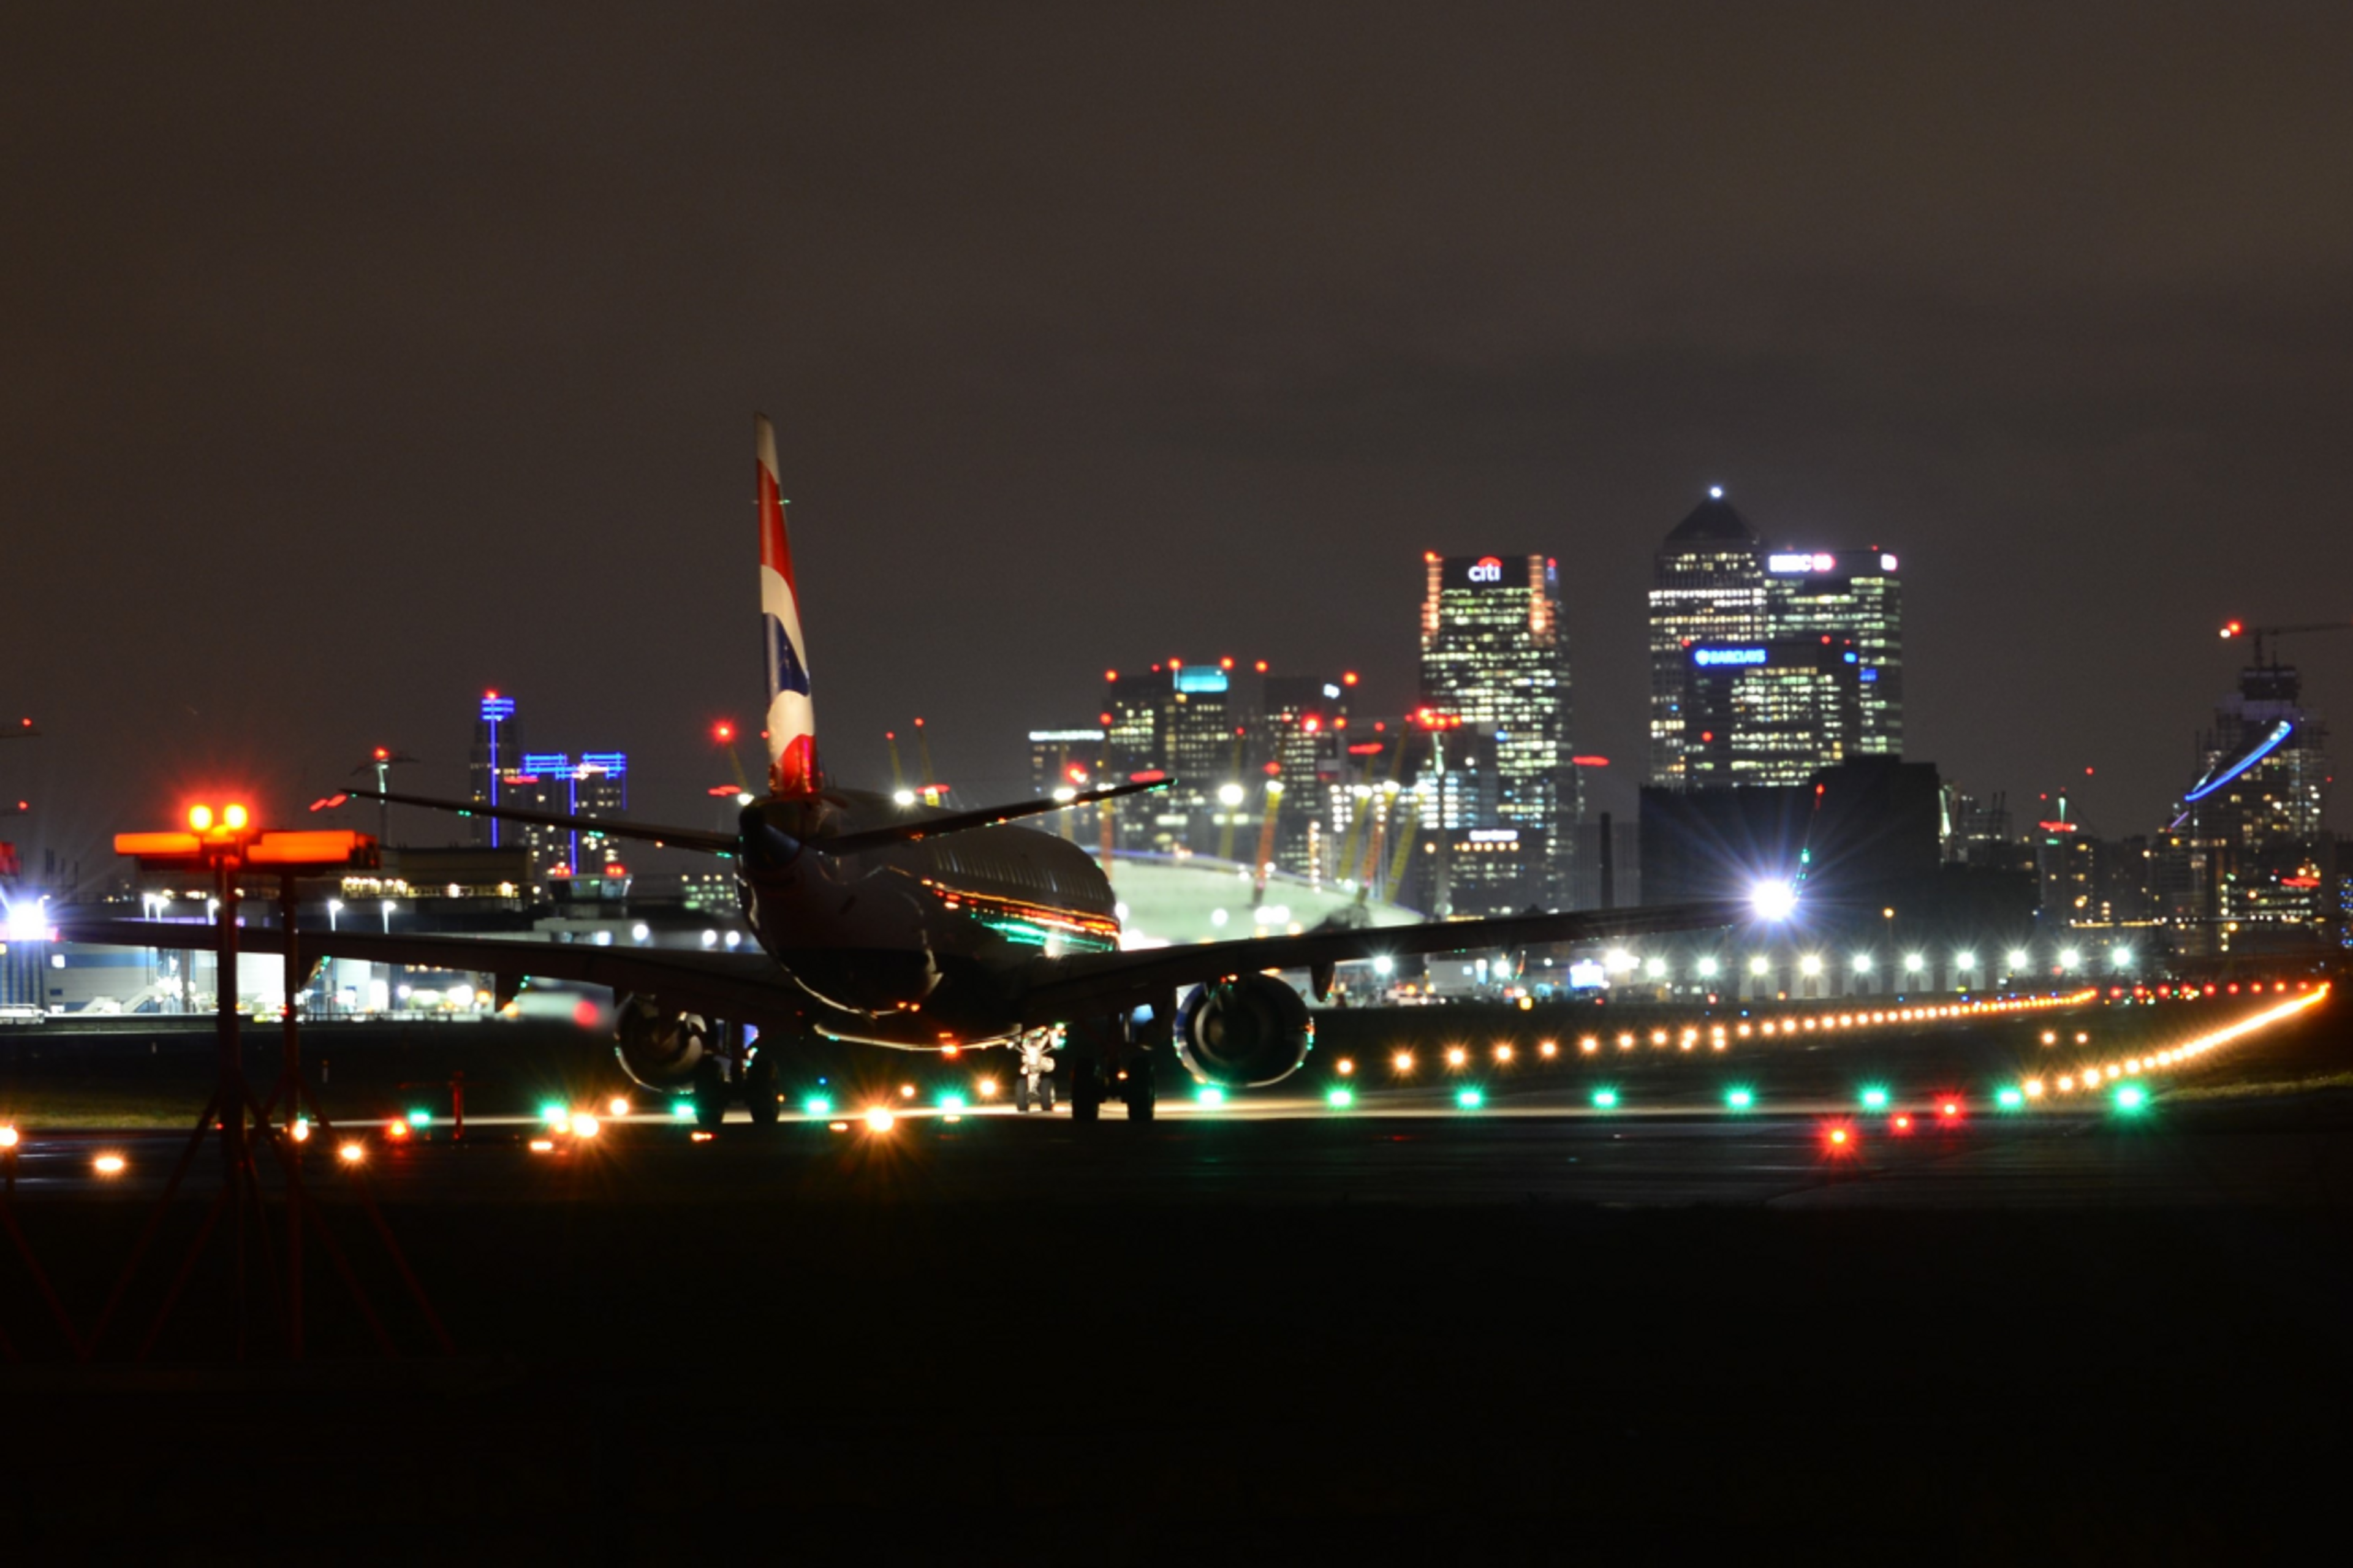 London City Airport – Business connections